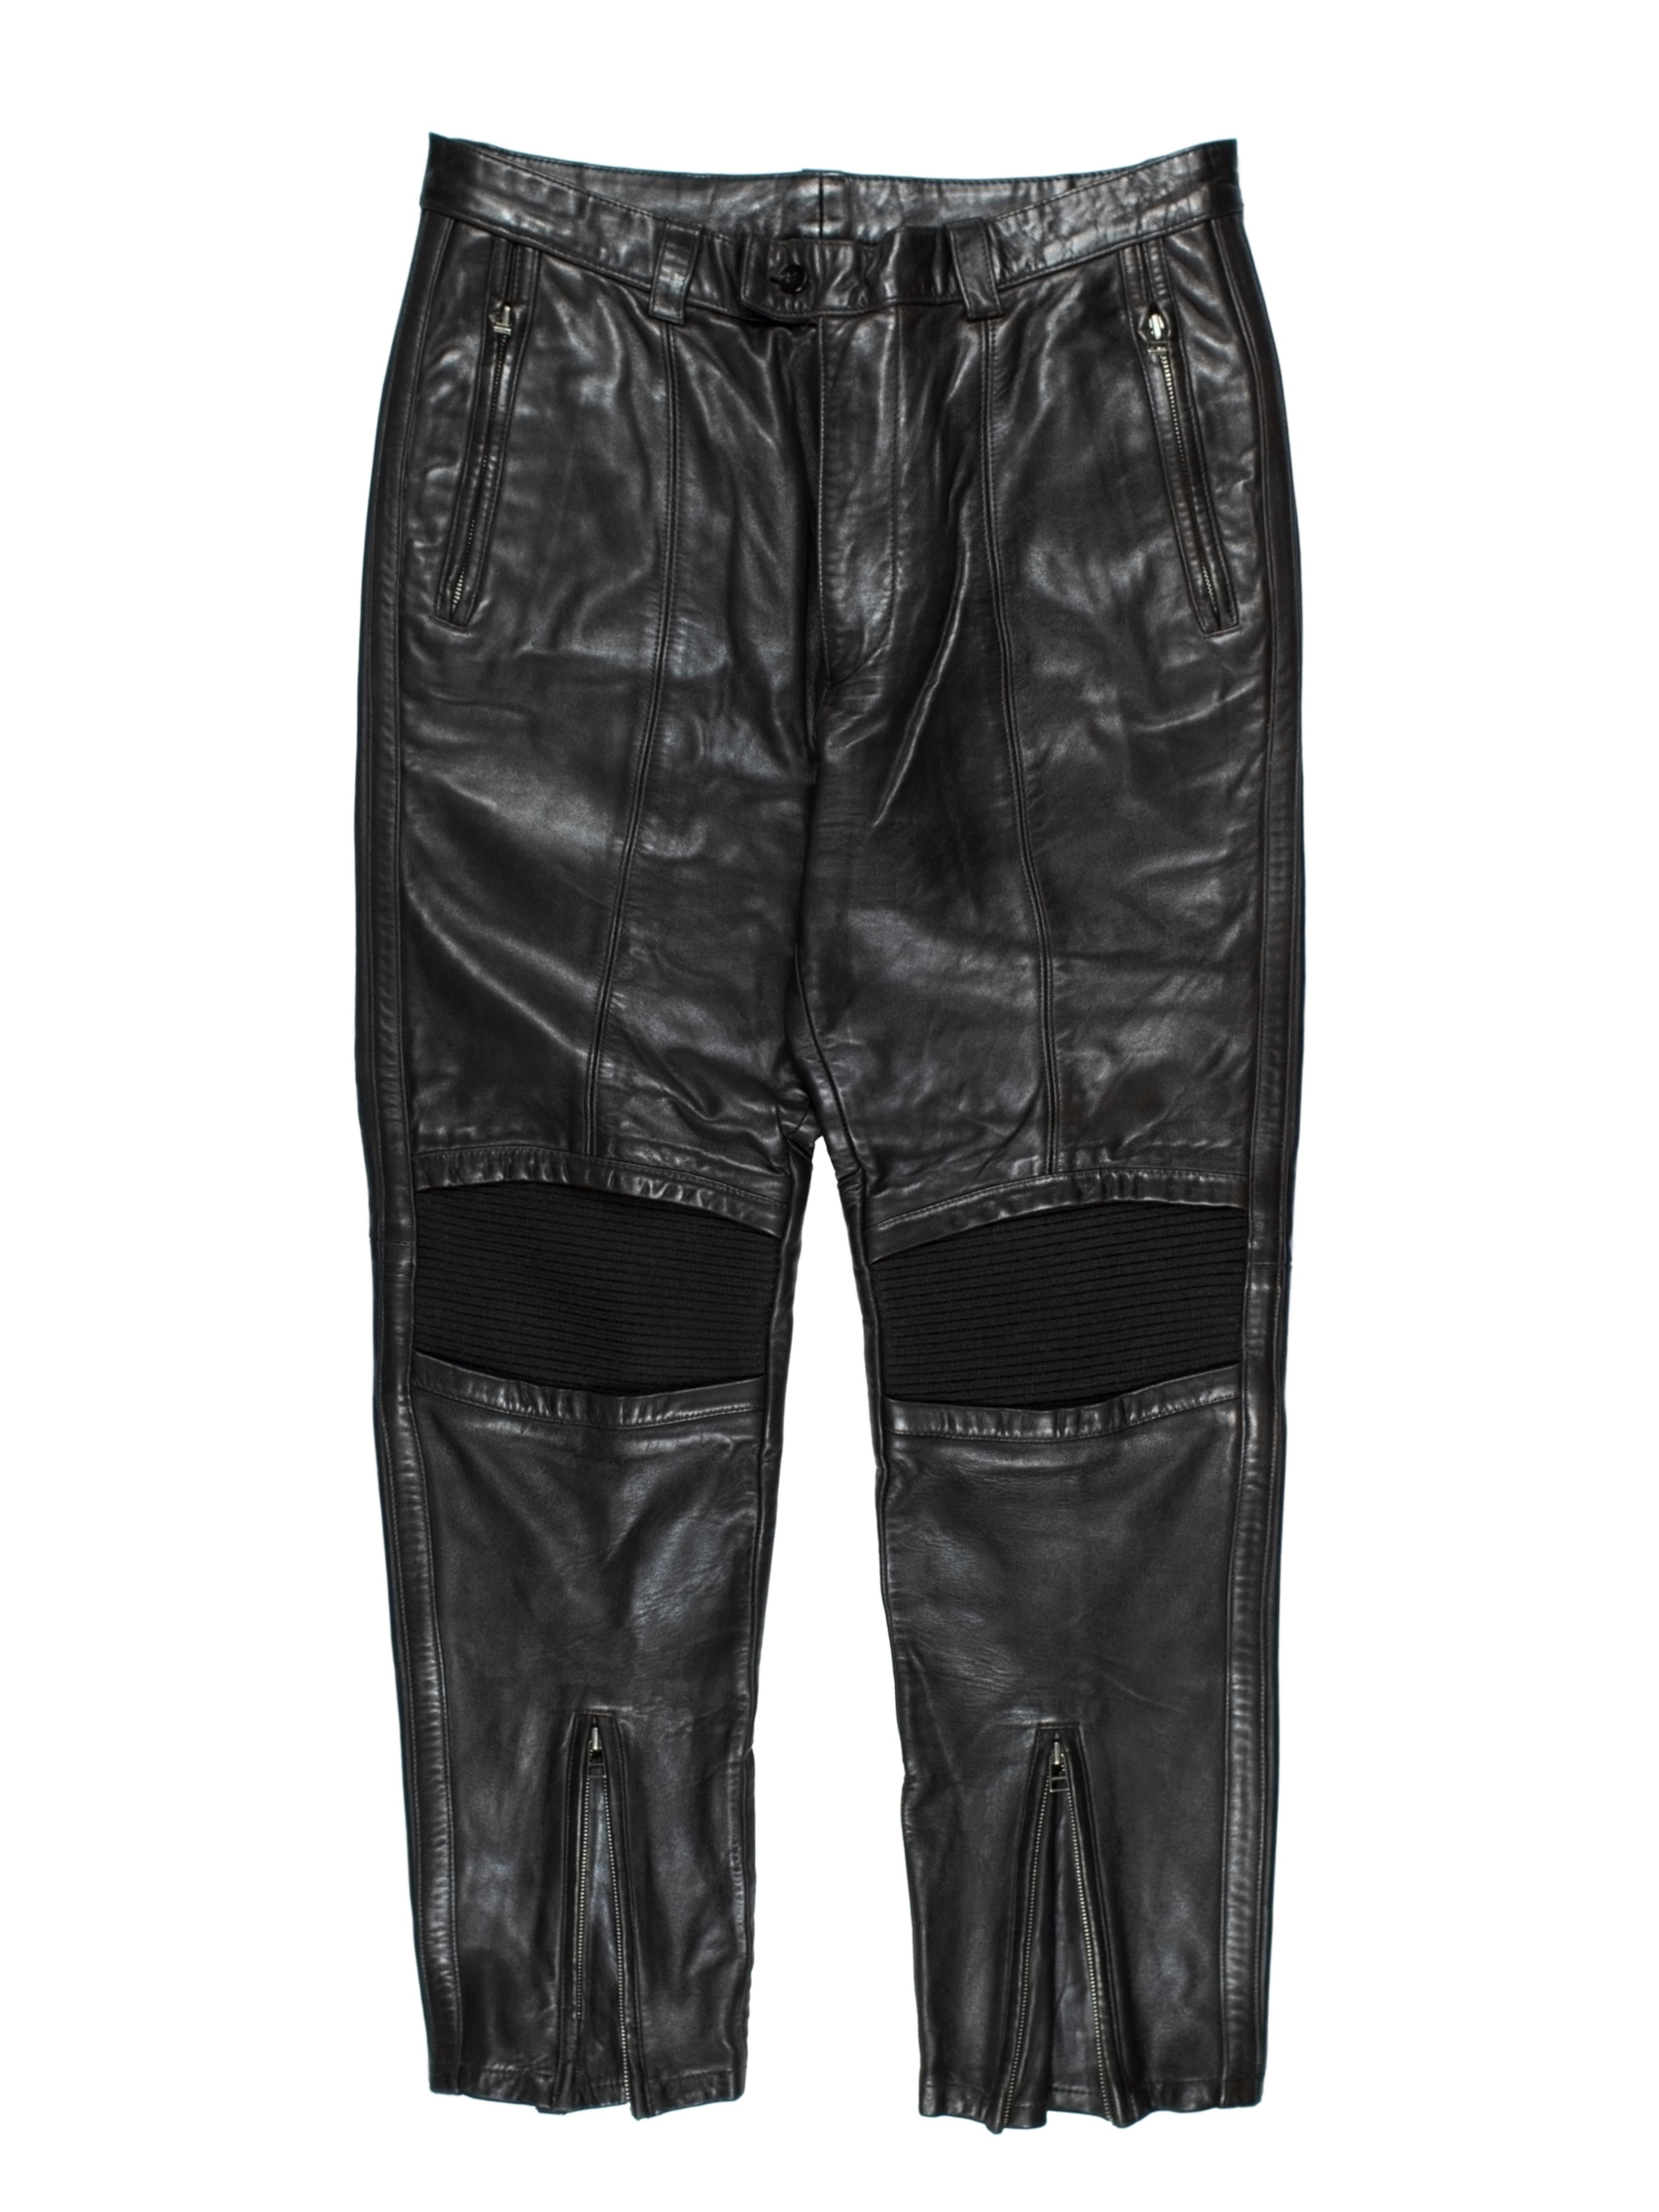 issey miyake jeans chrome hearts